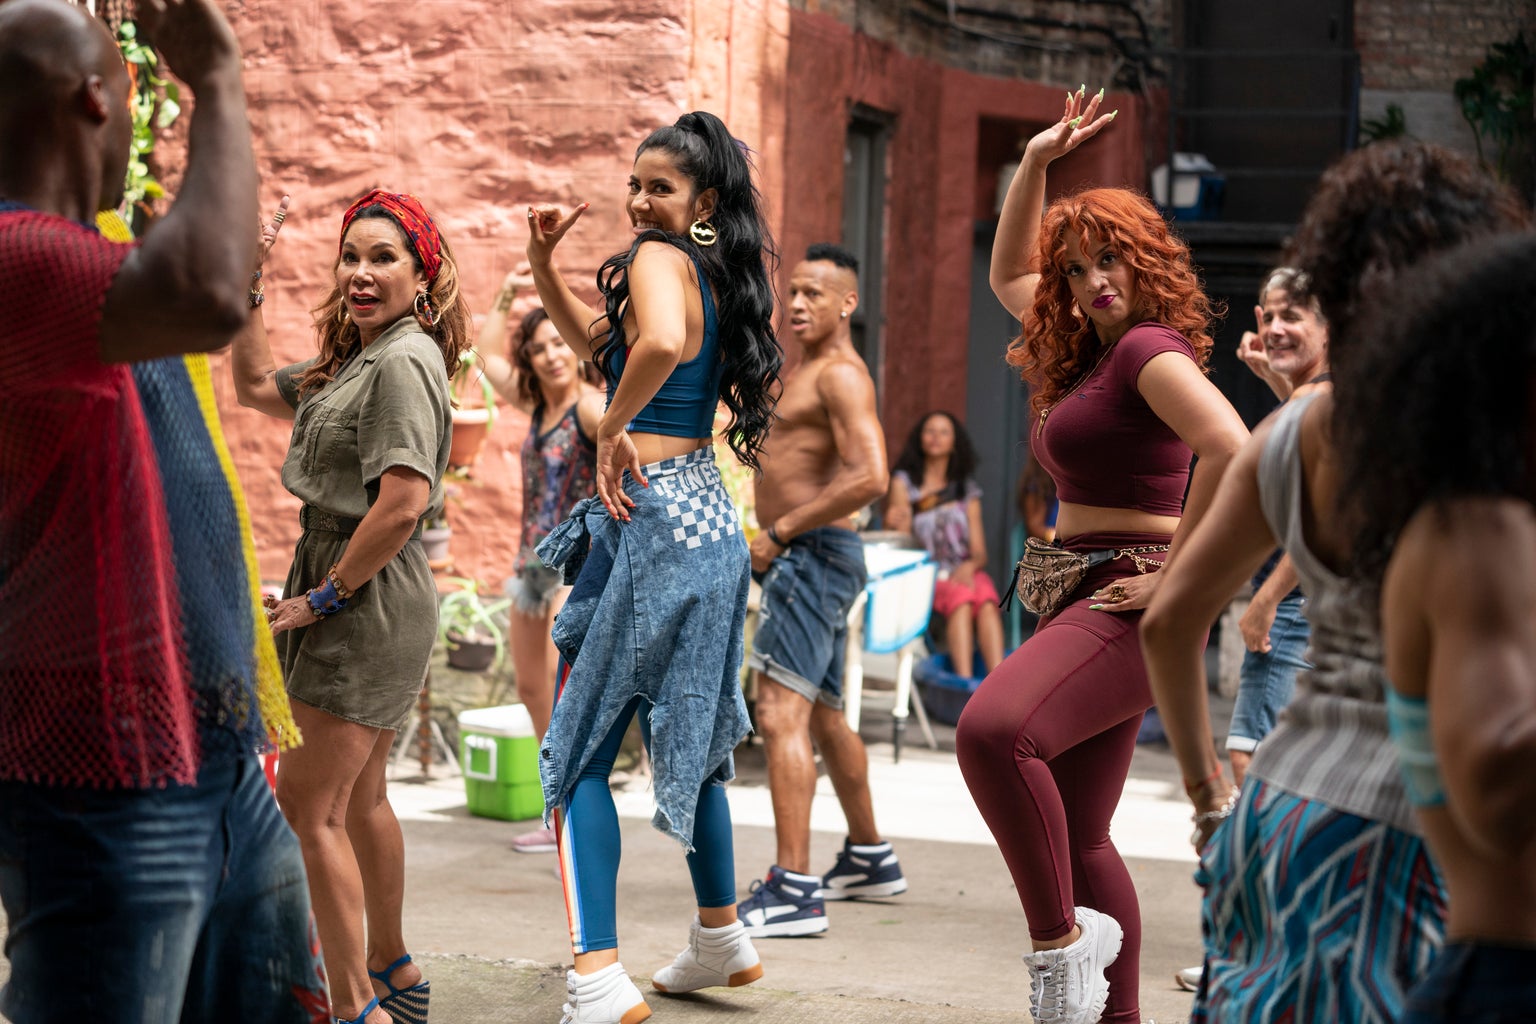 DAPHNE RUBIN-VEGA as Daniela, STEPHANIE BEATRIZ as Carla and DASCHA POLANCO as Cuca in Warner Bros. Pictures’ “IN THE HEIGHTS,” a Warner Bros. Pictures release.